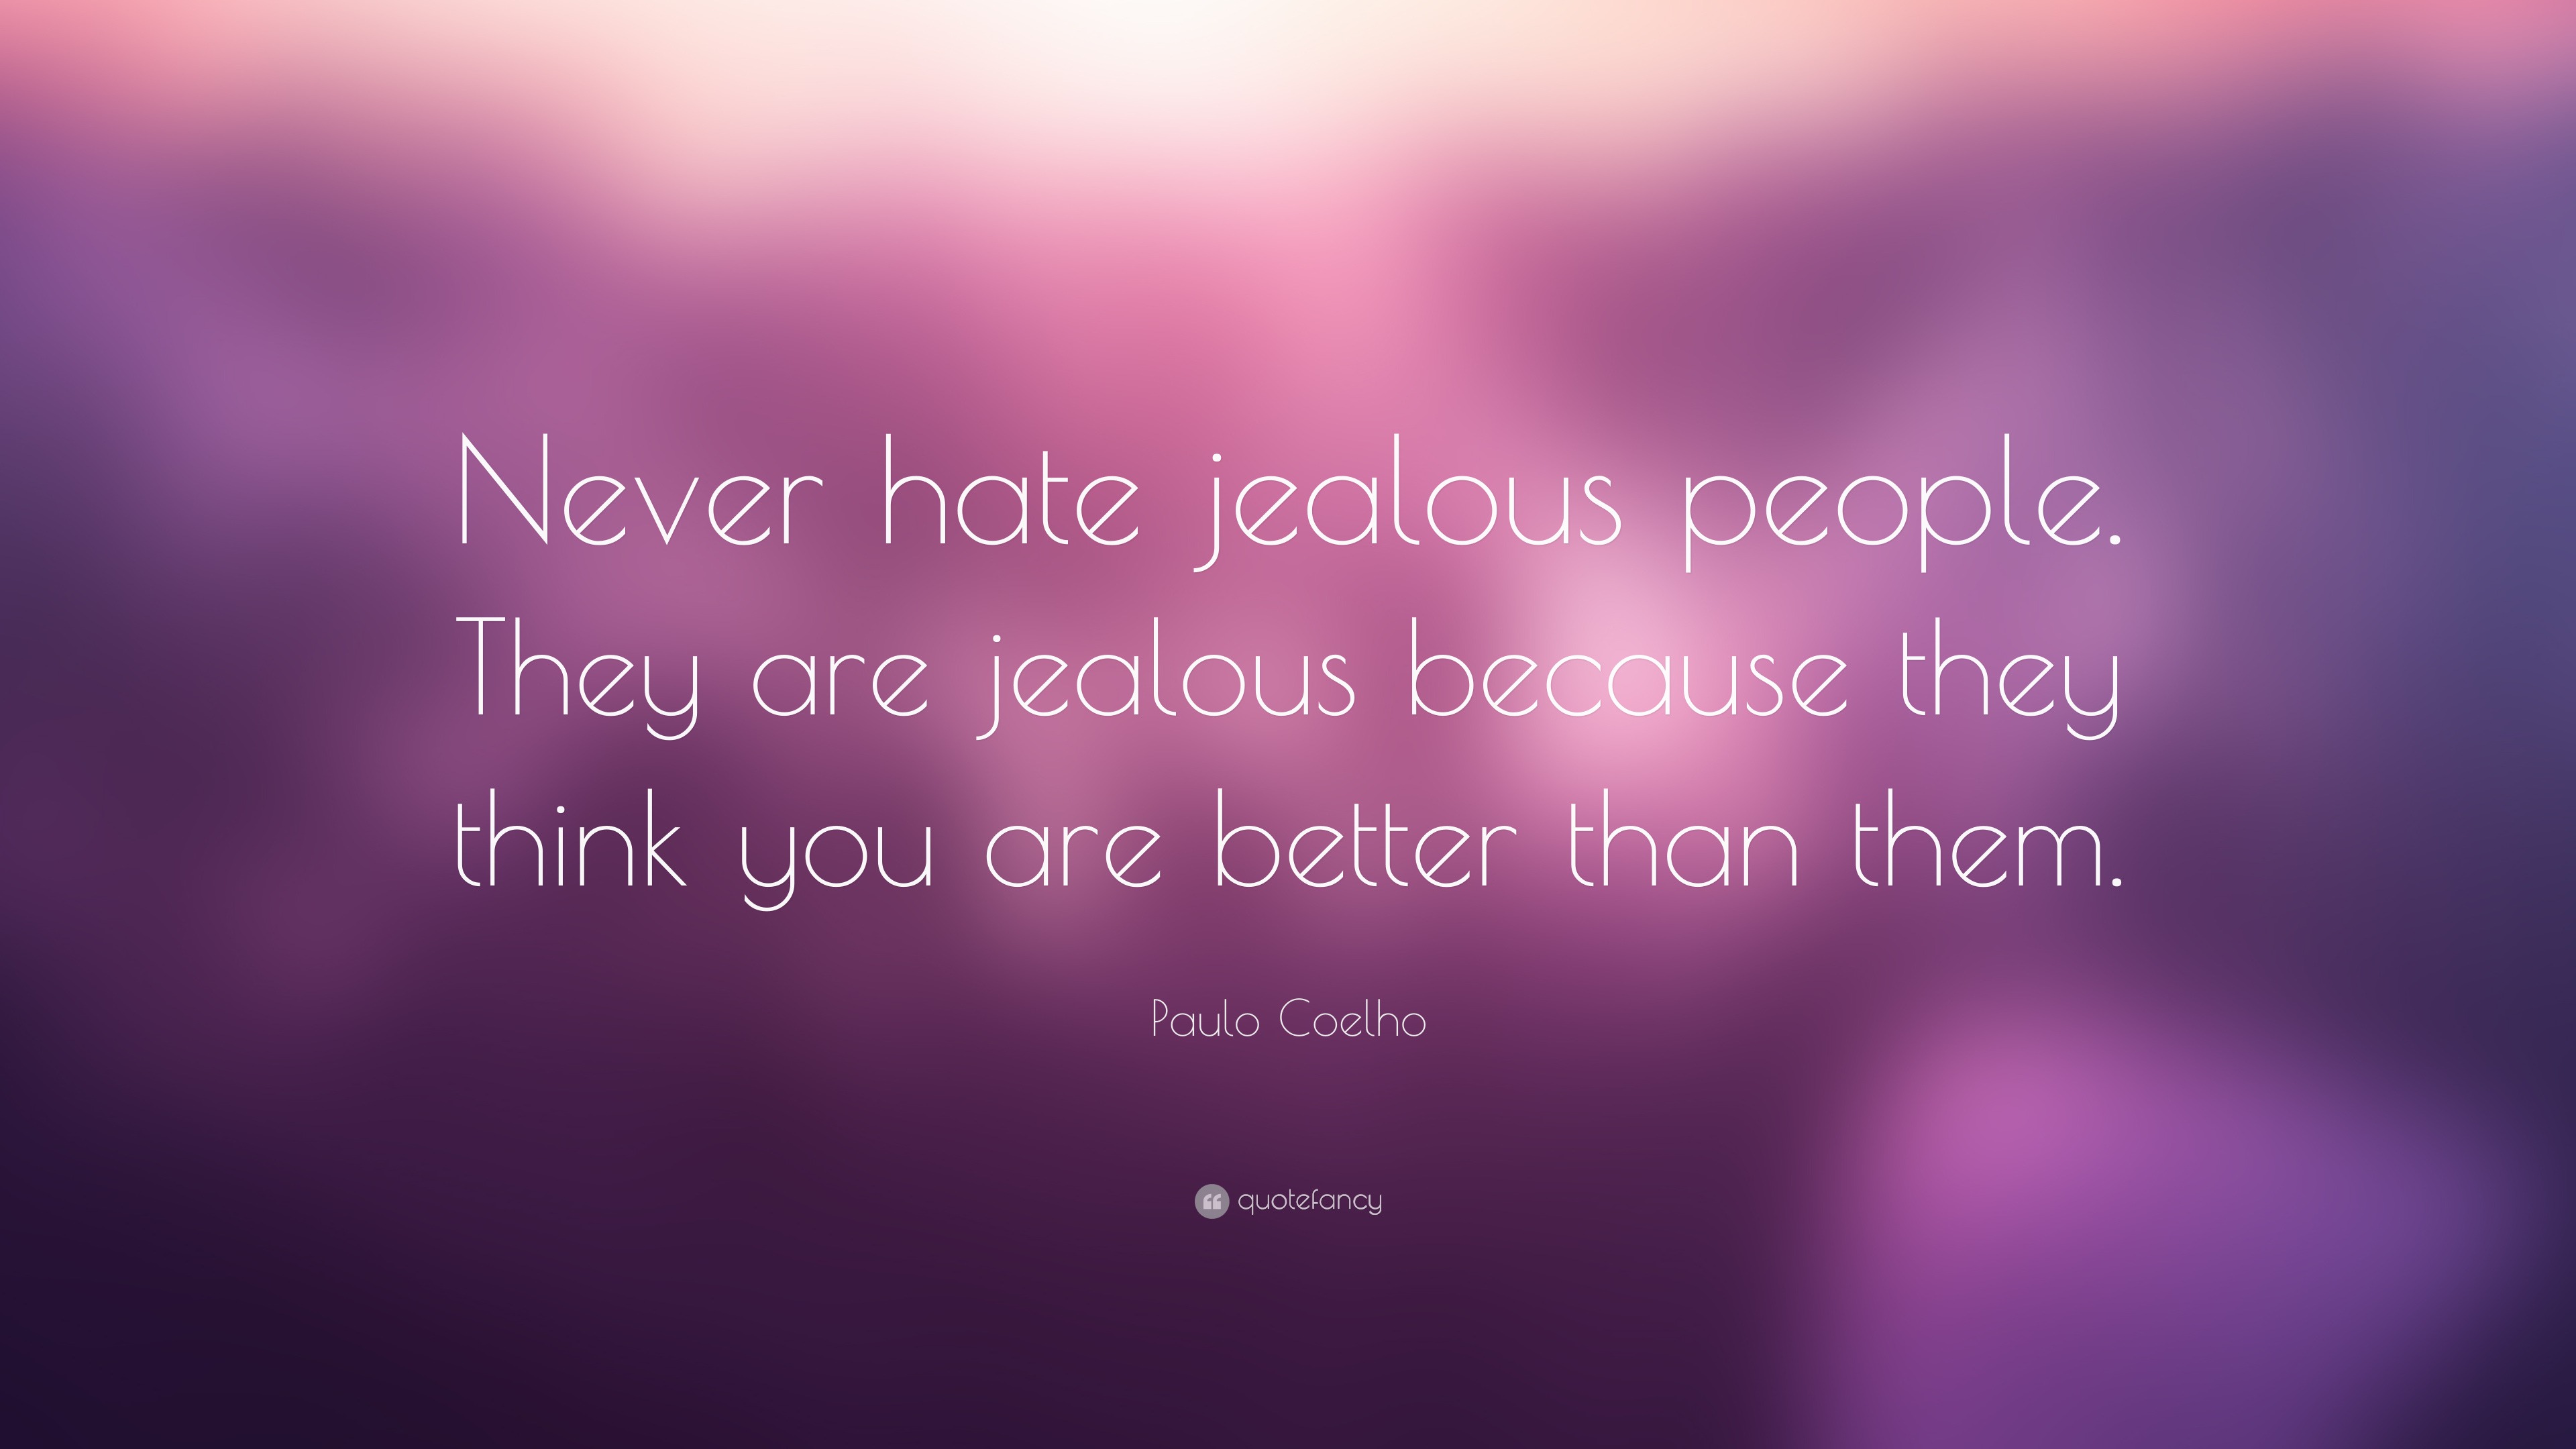 Paulo Coelho Quote: “Never hate jealous people. They are jealous